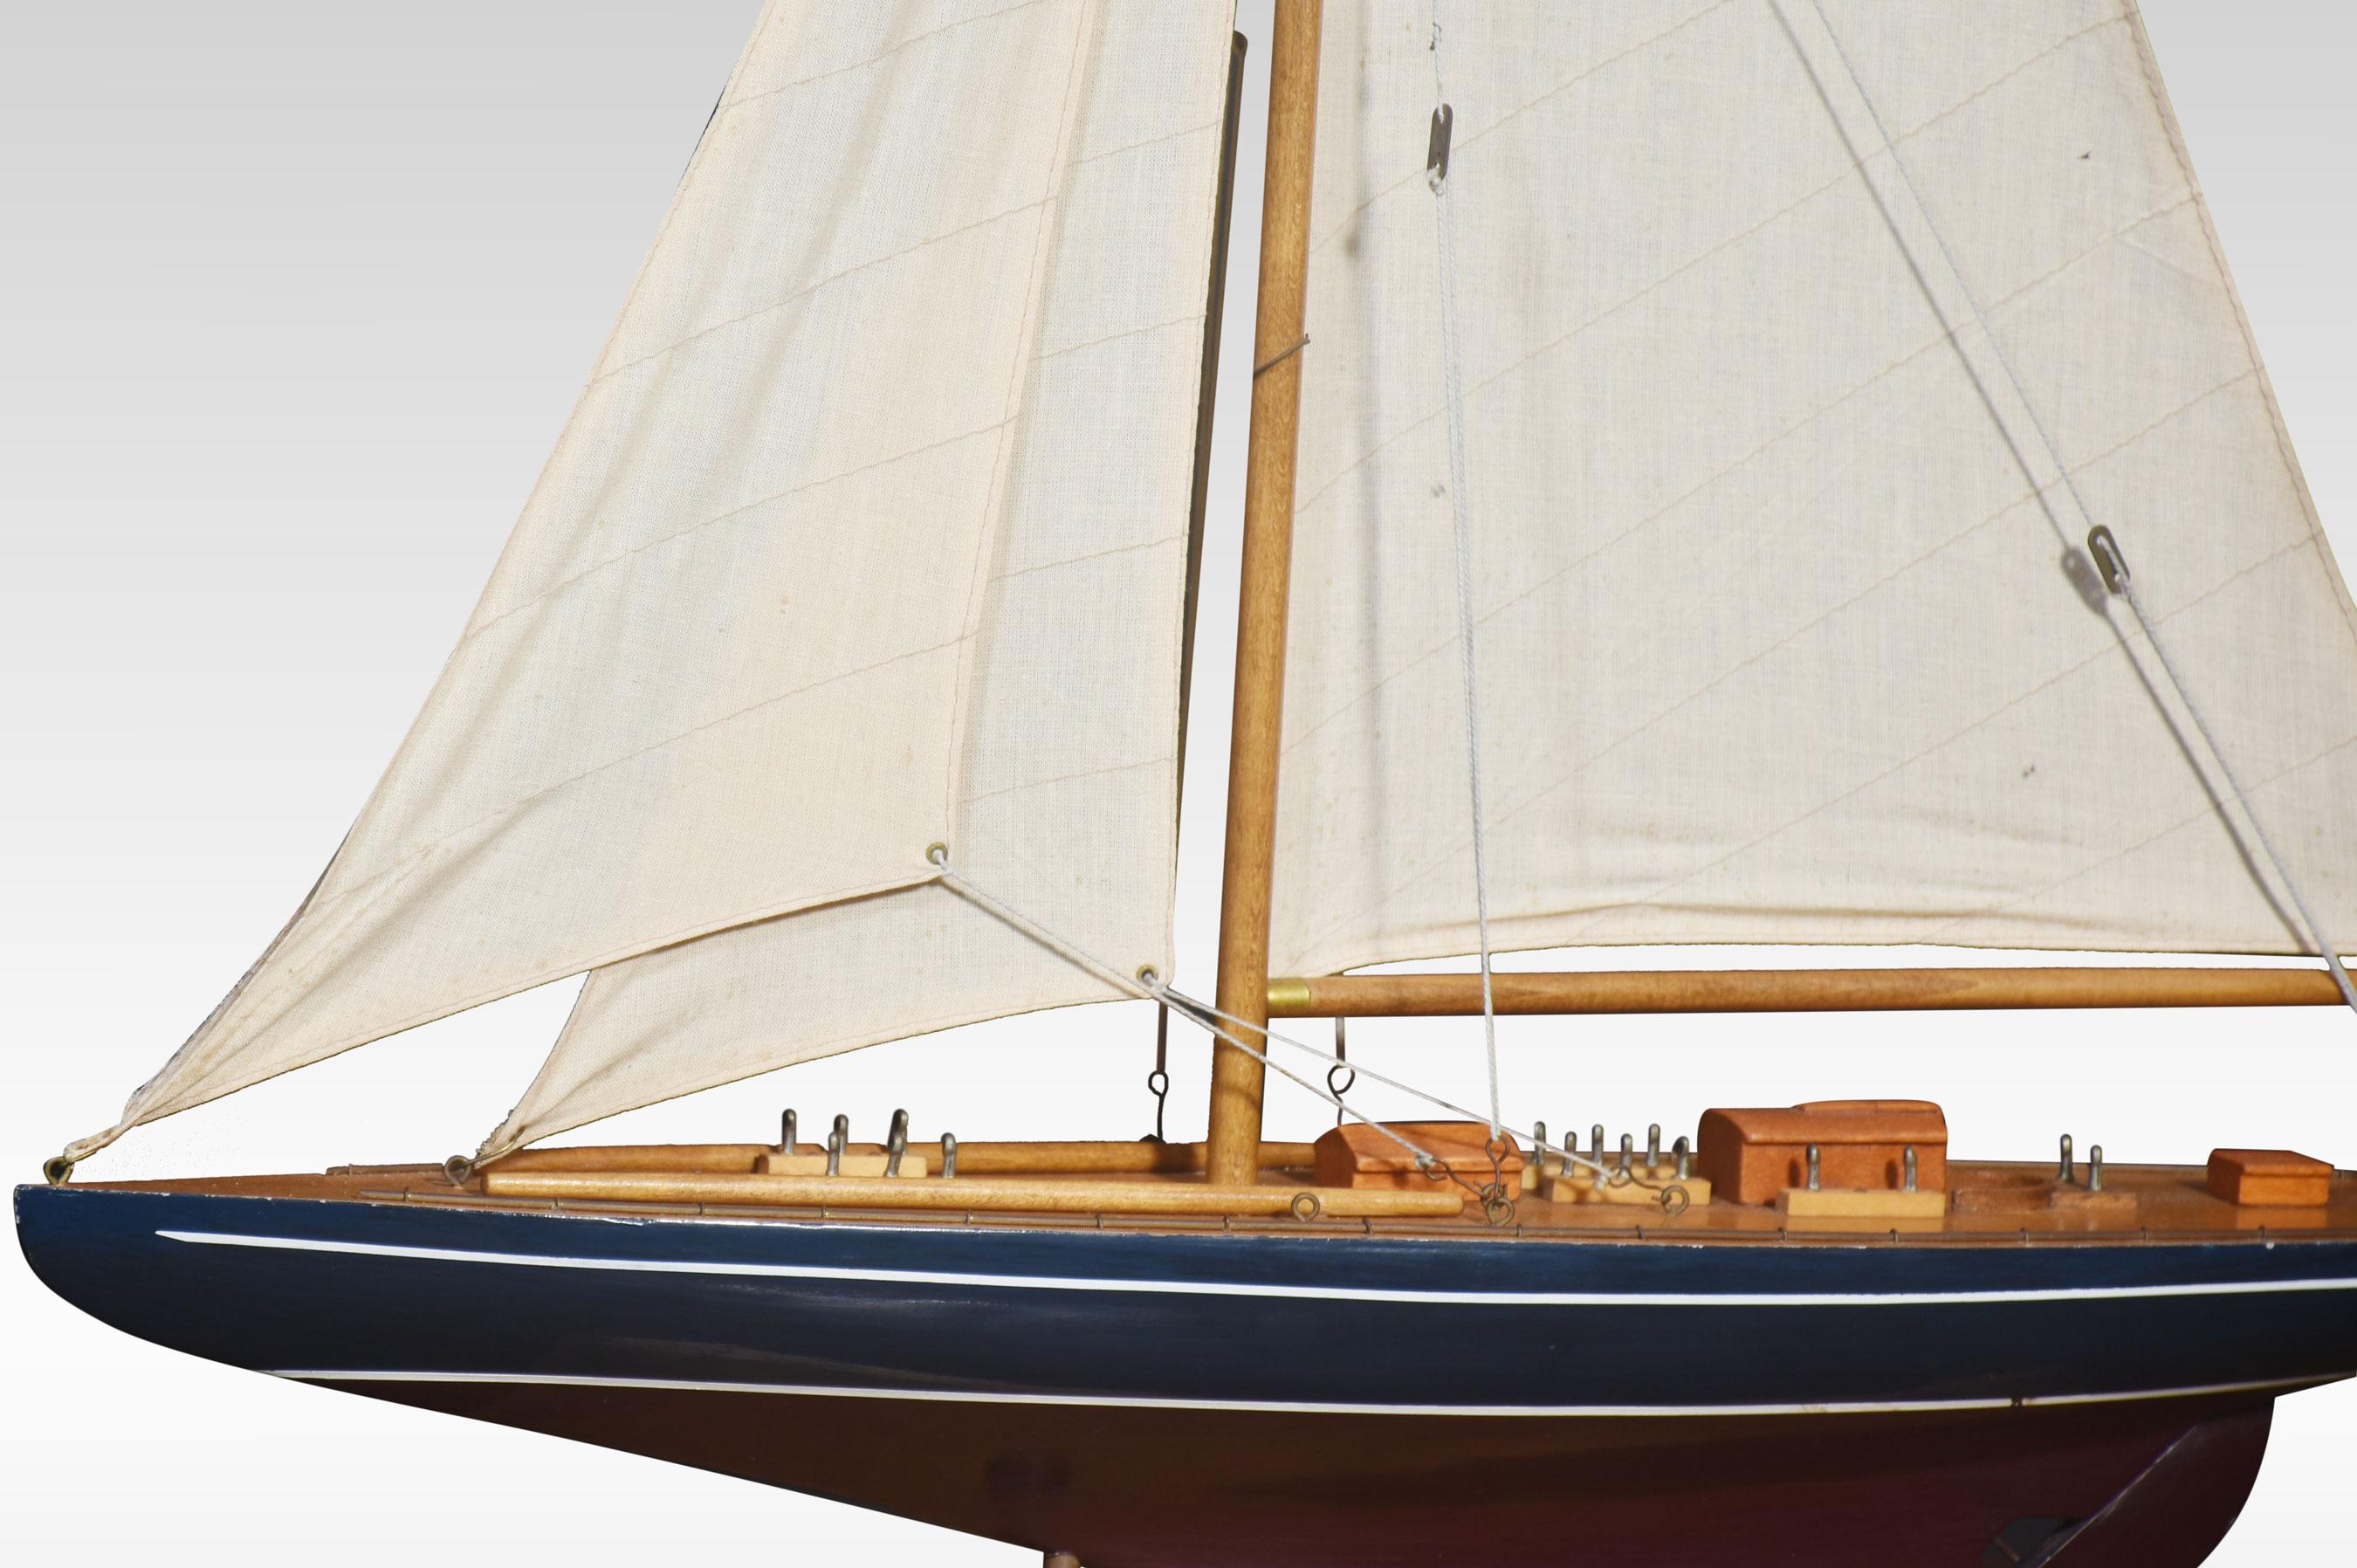 Model of a sailing yacht, painted in blue and red complete With three sails. All raised on a wooden base.
Dimensions
Height 34 Inches
Width 24 Inches
Depth 5 Inches